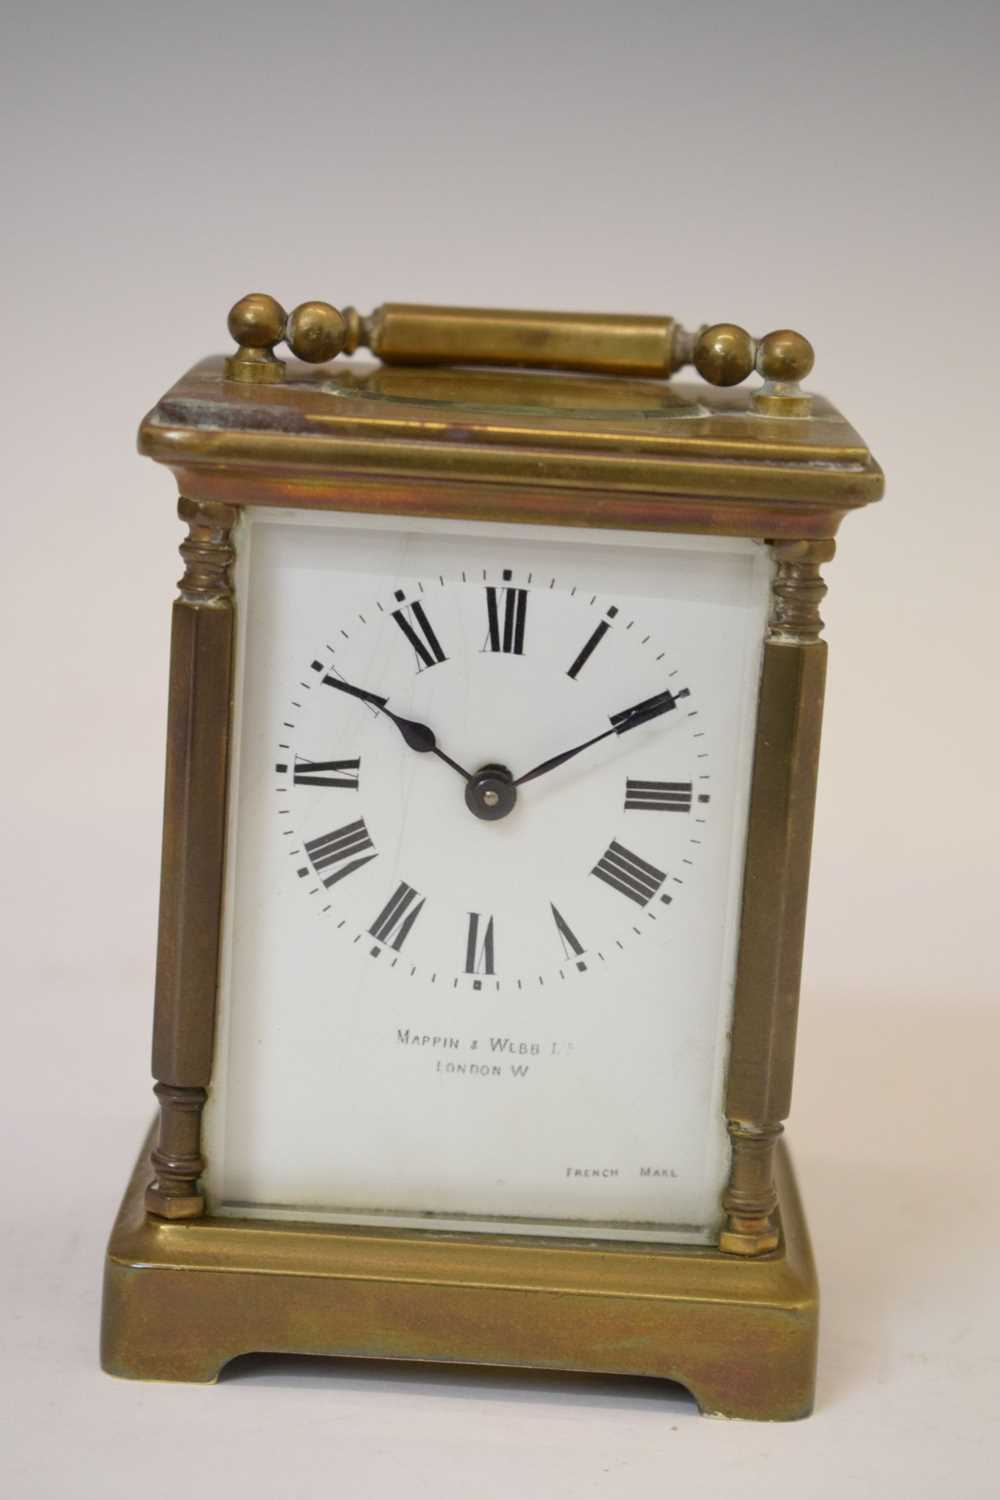 Morocco mounted desk clock and Mappin & Webb gilt metal carriage timepiece - Image 2 of 11